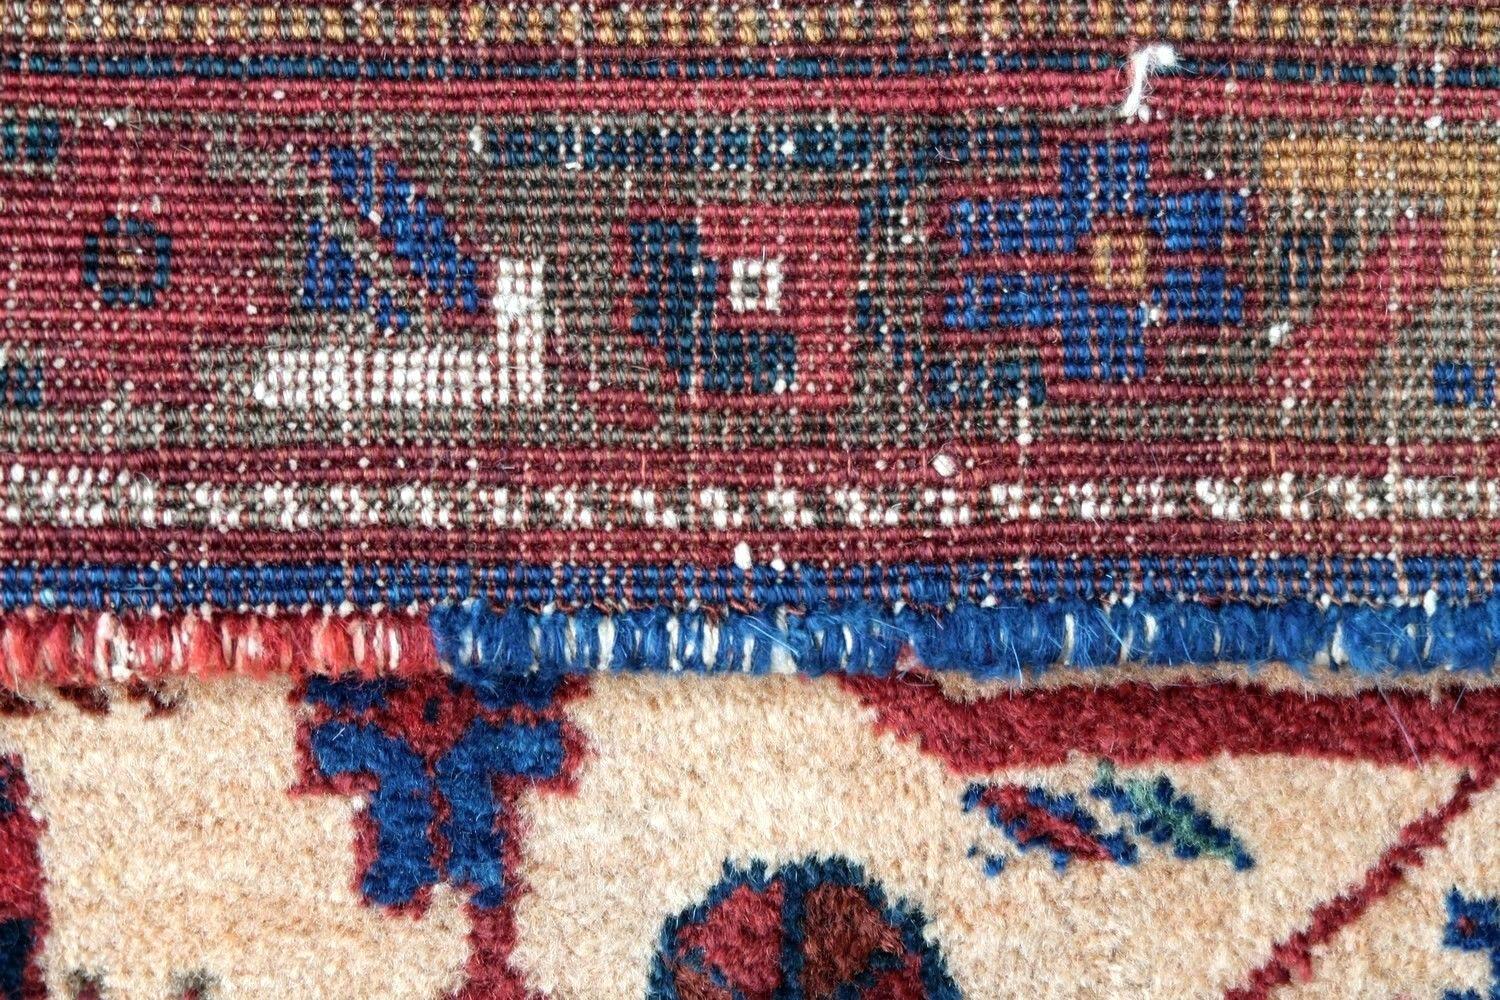 Antique Afshar rug from Middle East in colorful shades. The rug is from the beginning of the 20th century in original condition, it has one spot with discoloration.

- Condition: original good, a stain,

- circa 1930s,

- Size: 4.3' x 5.6'